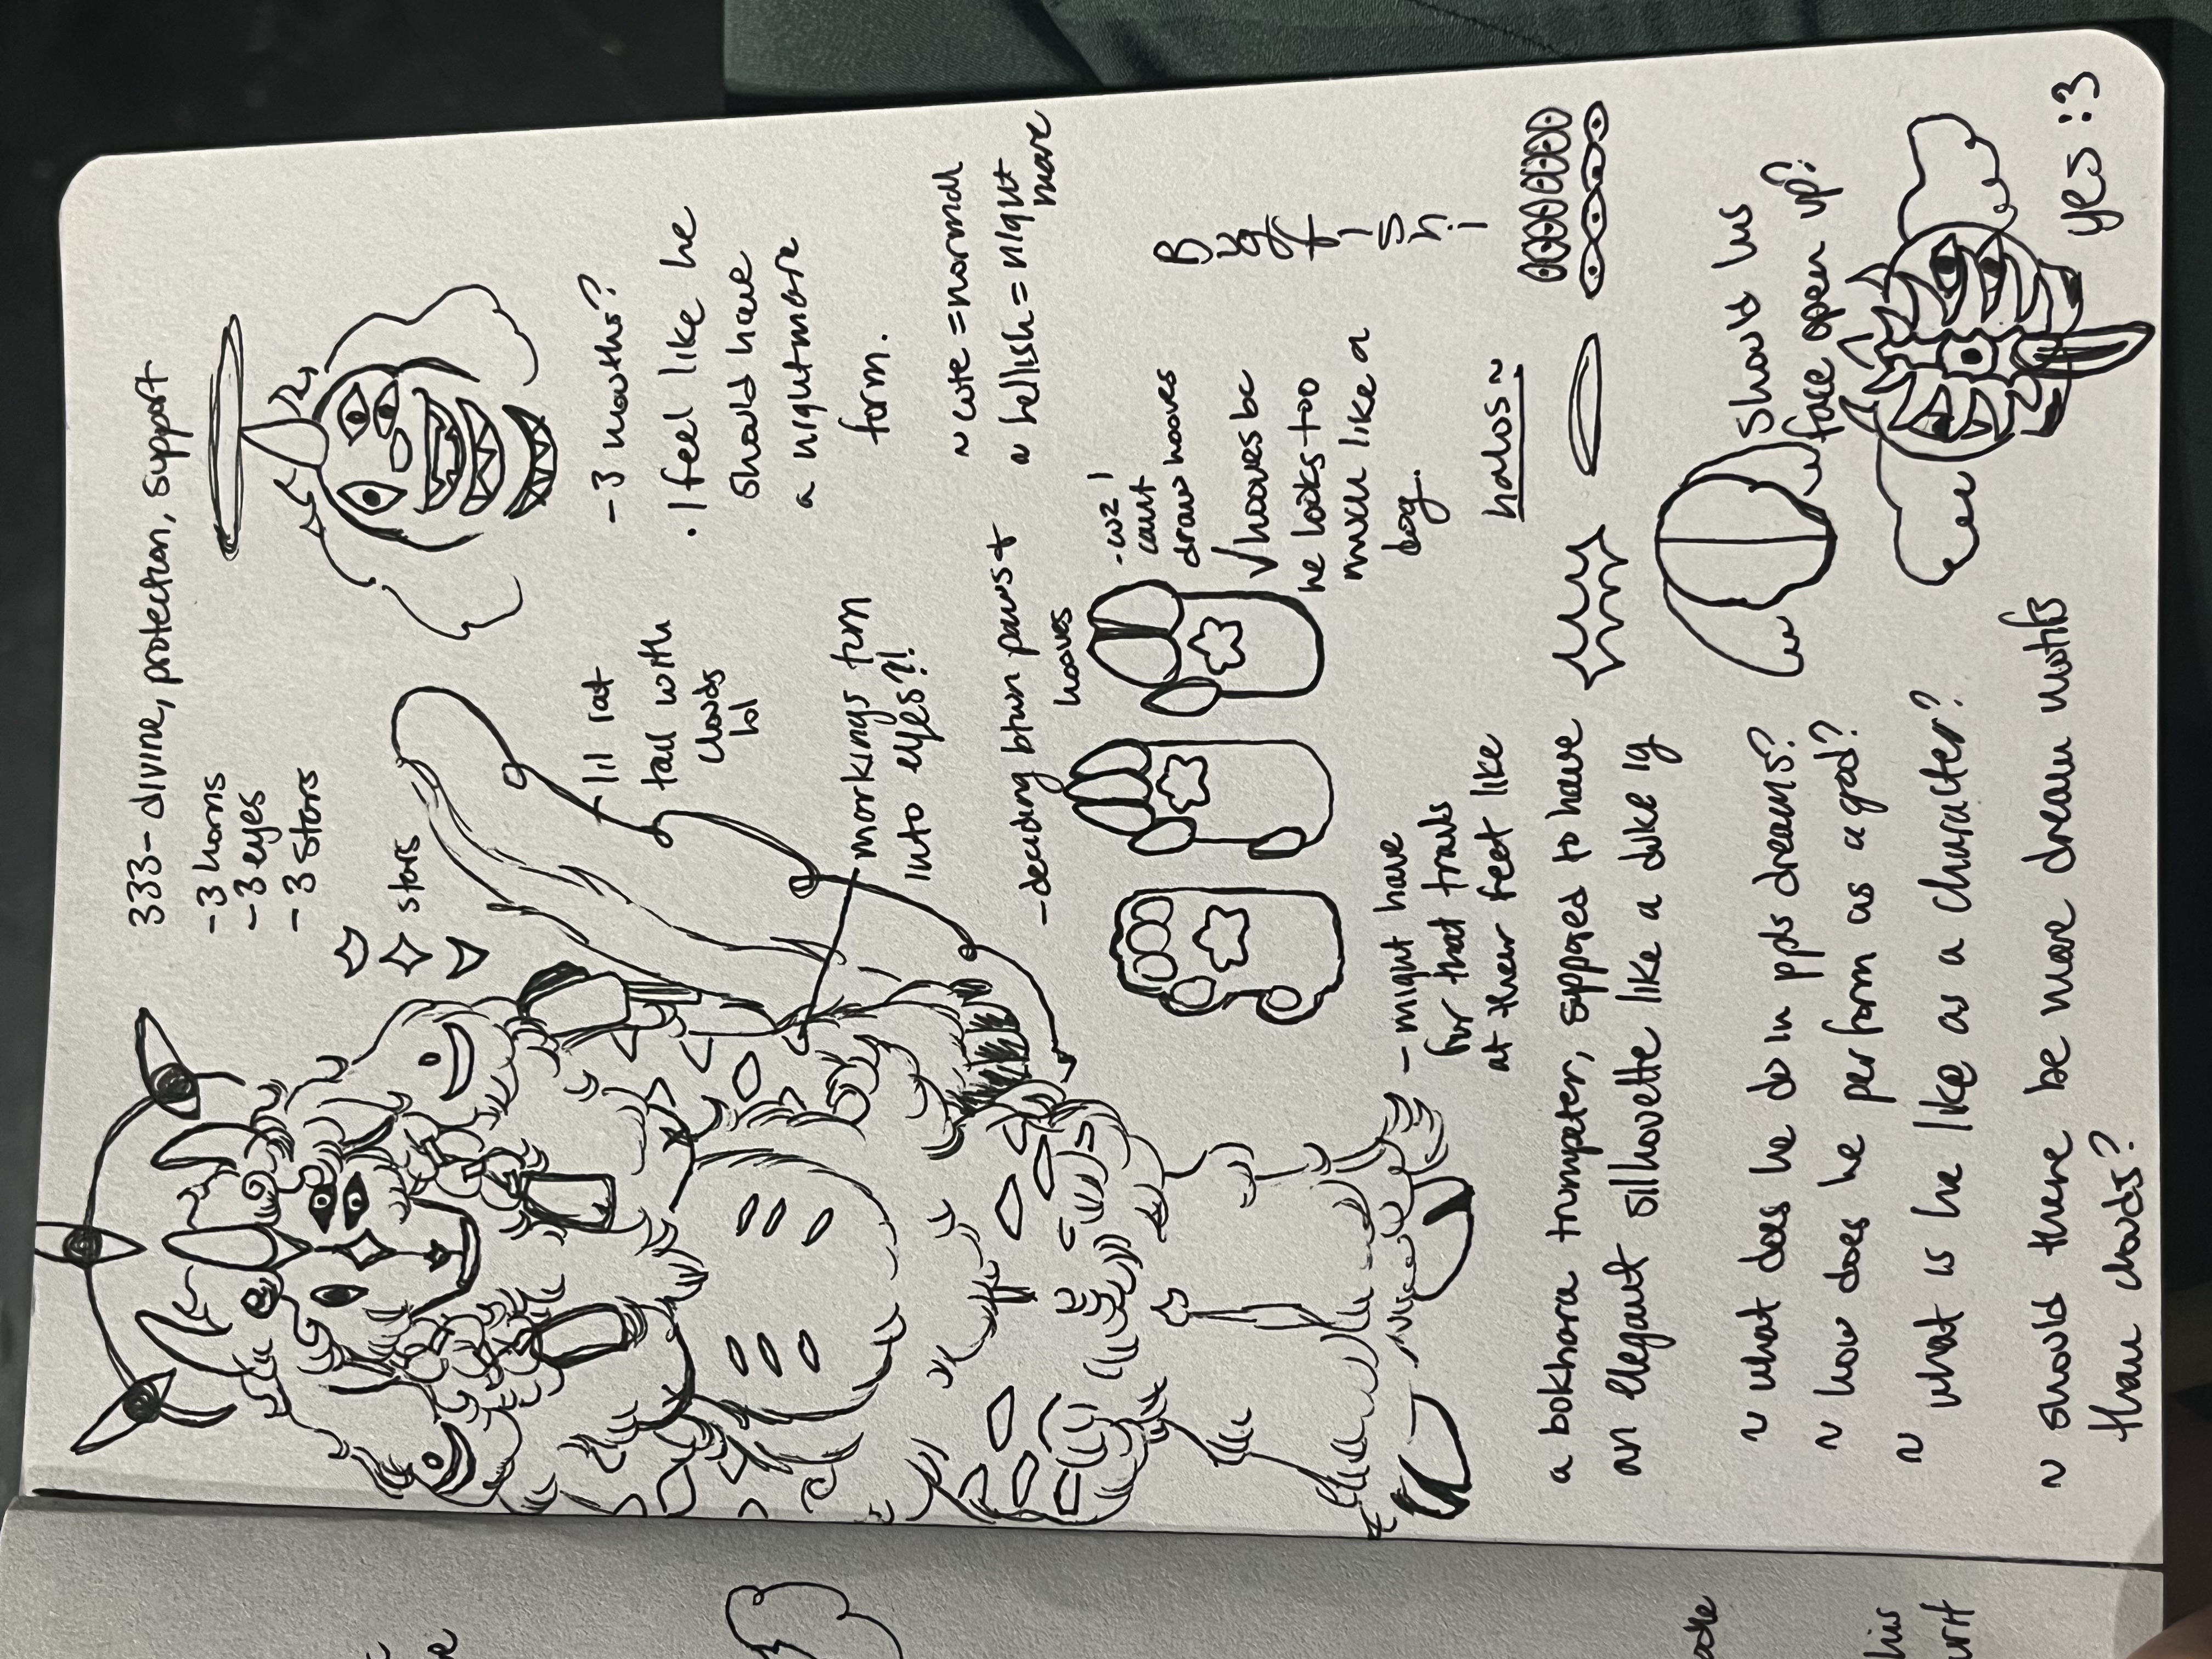 page 2 of lamby's concept notes